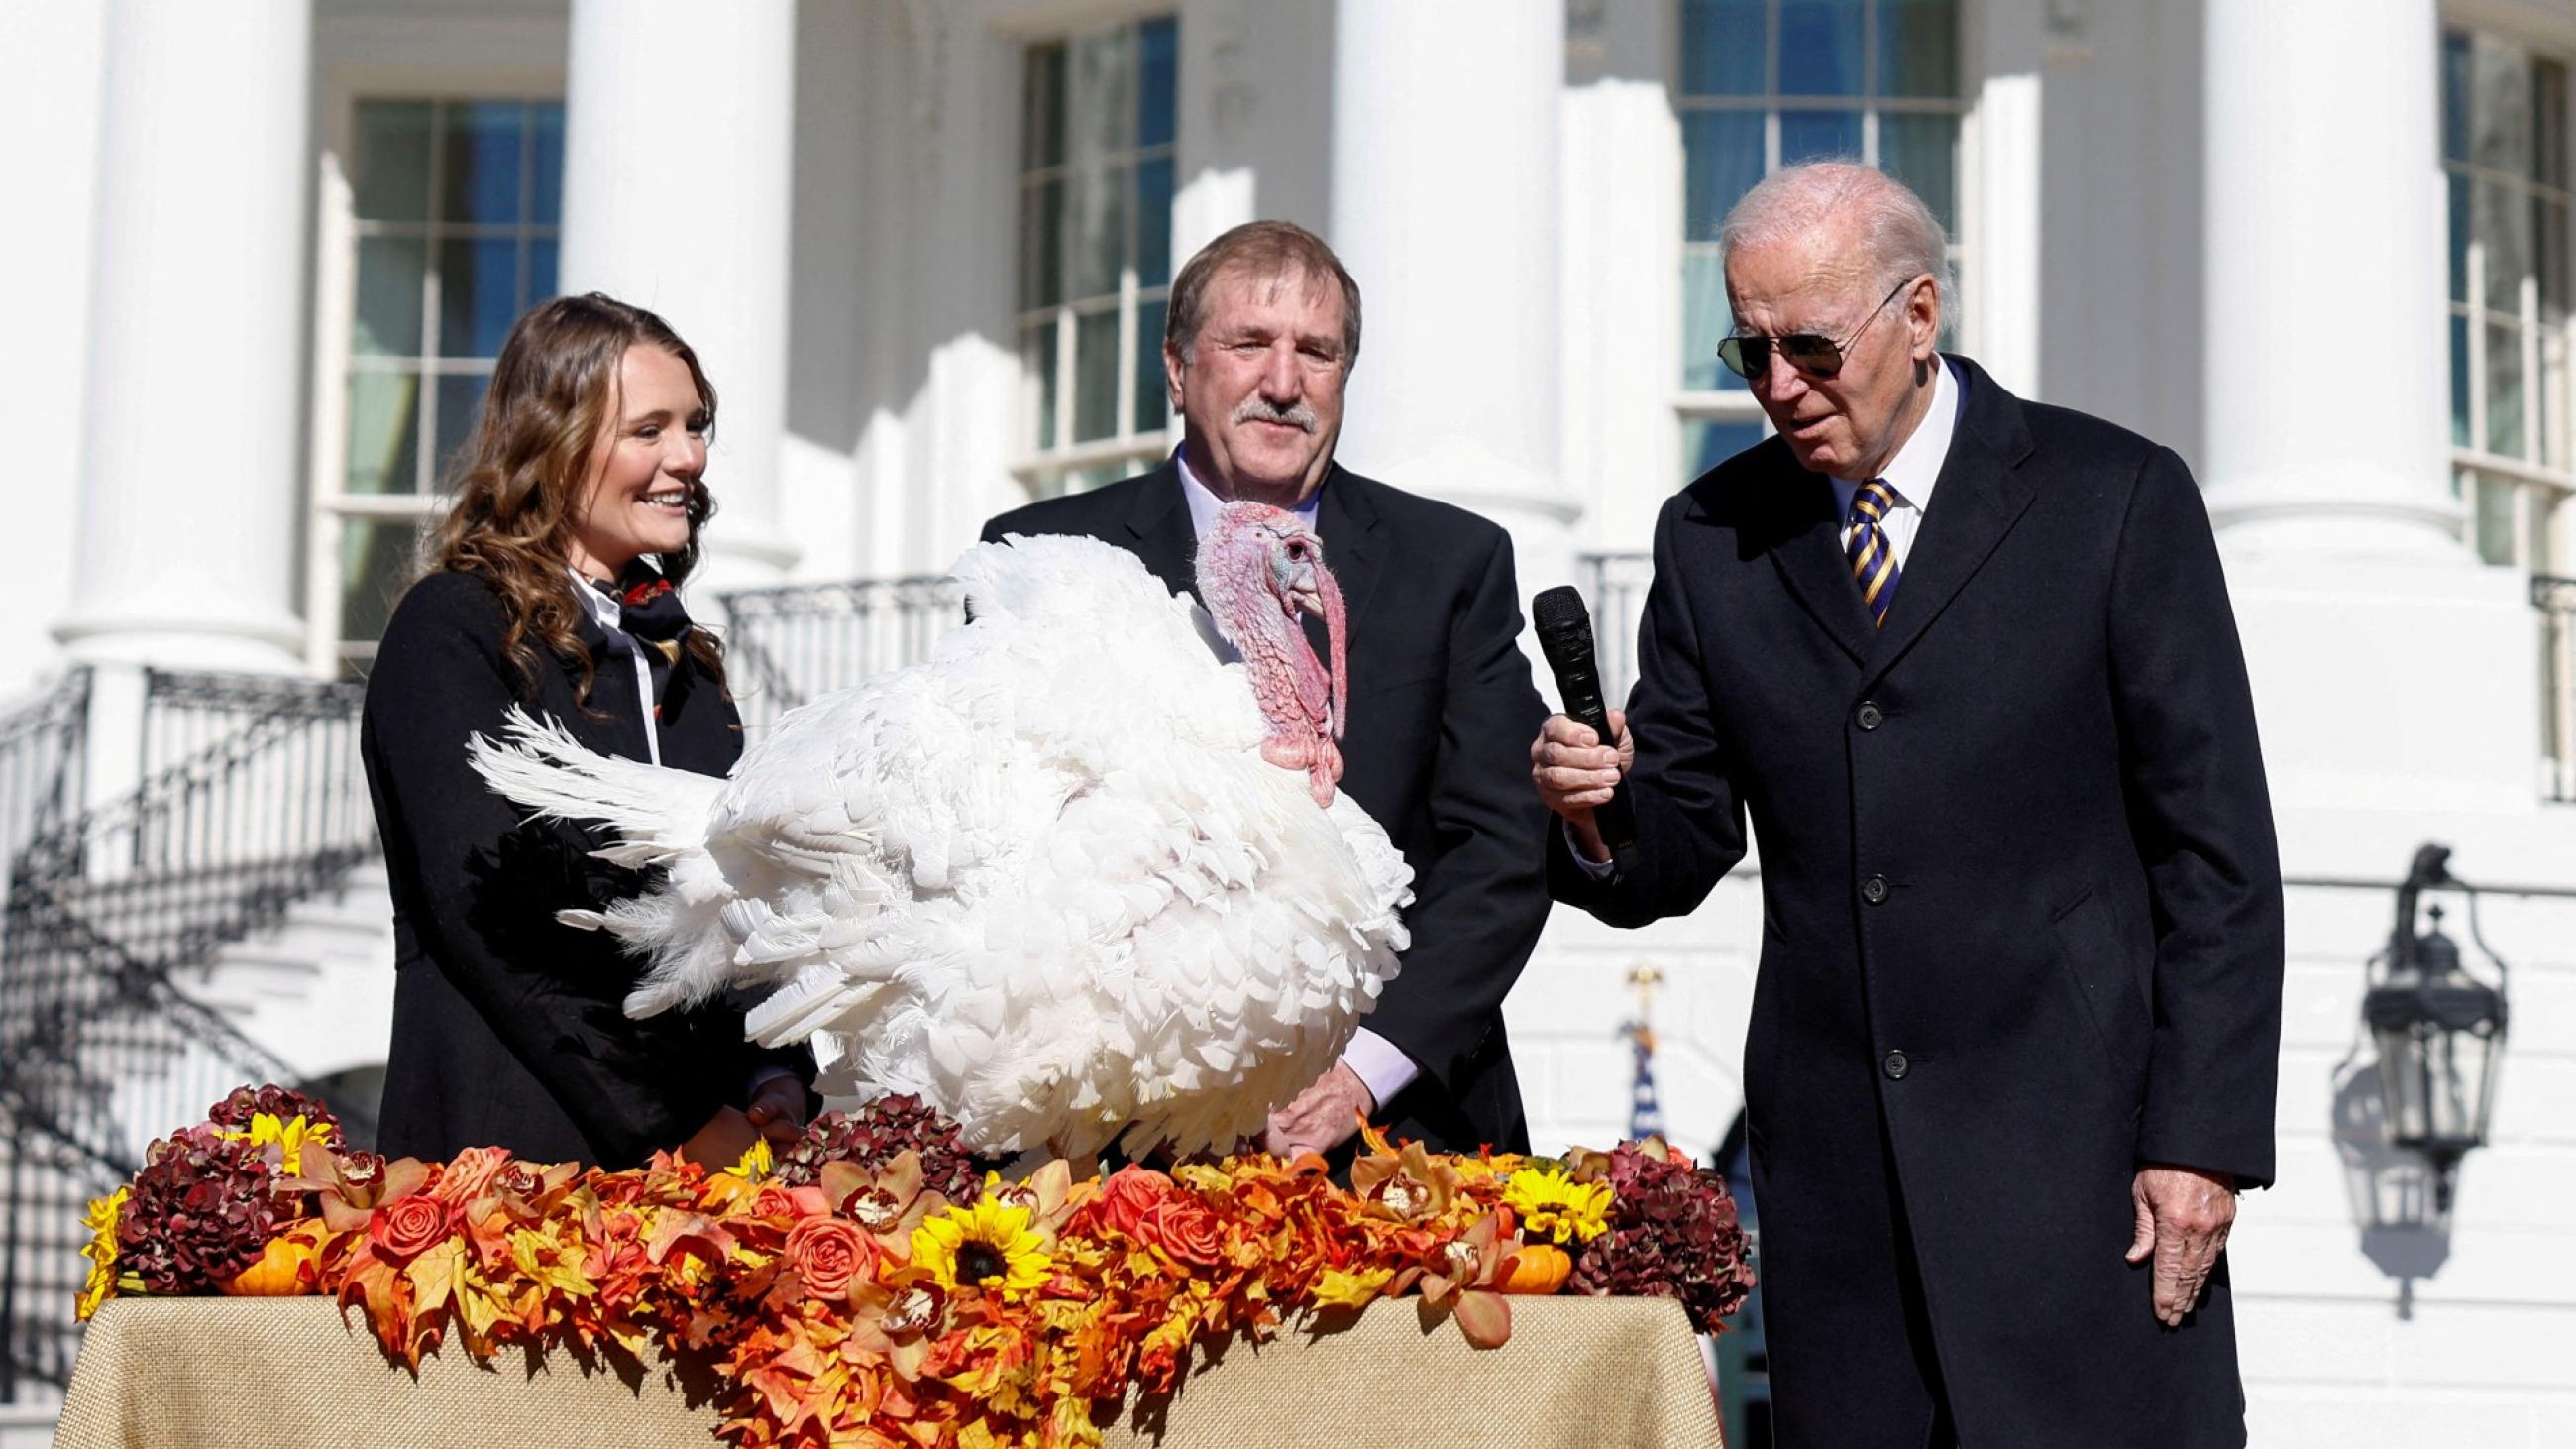 President Joe Biden attends the annual ceremony to pardon Chocolate and Chip, the National Thanksgiving Turkeys, on the South Lawn of the White House in Washington, DC, on November 21, 2022. 